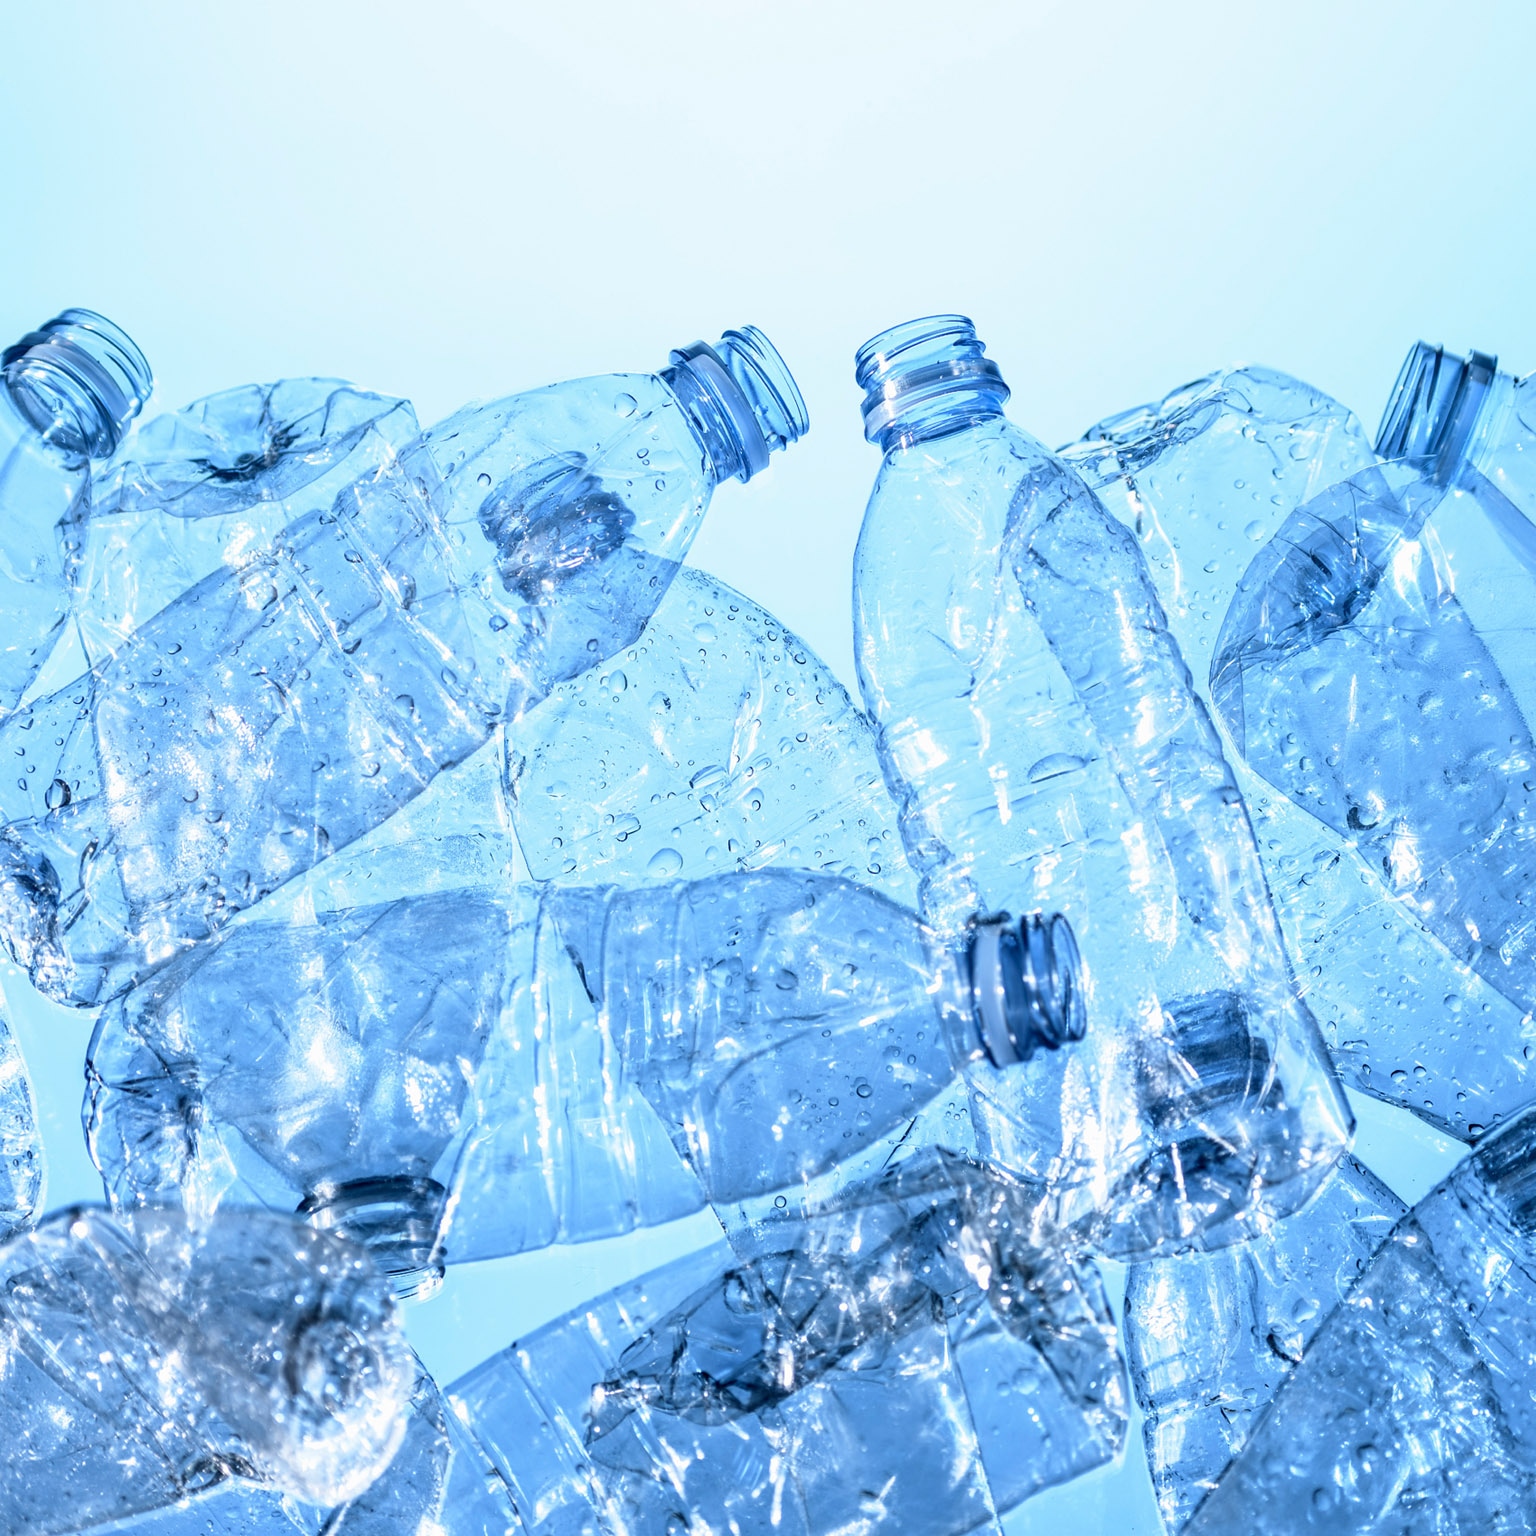 Recycling and the future of the plastics industry | McKinsey